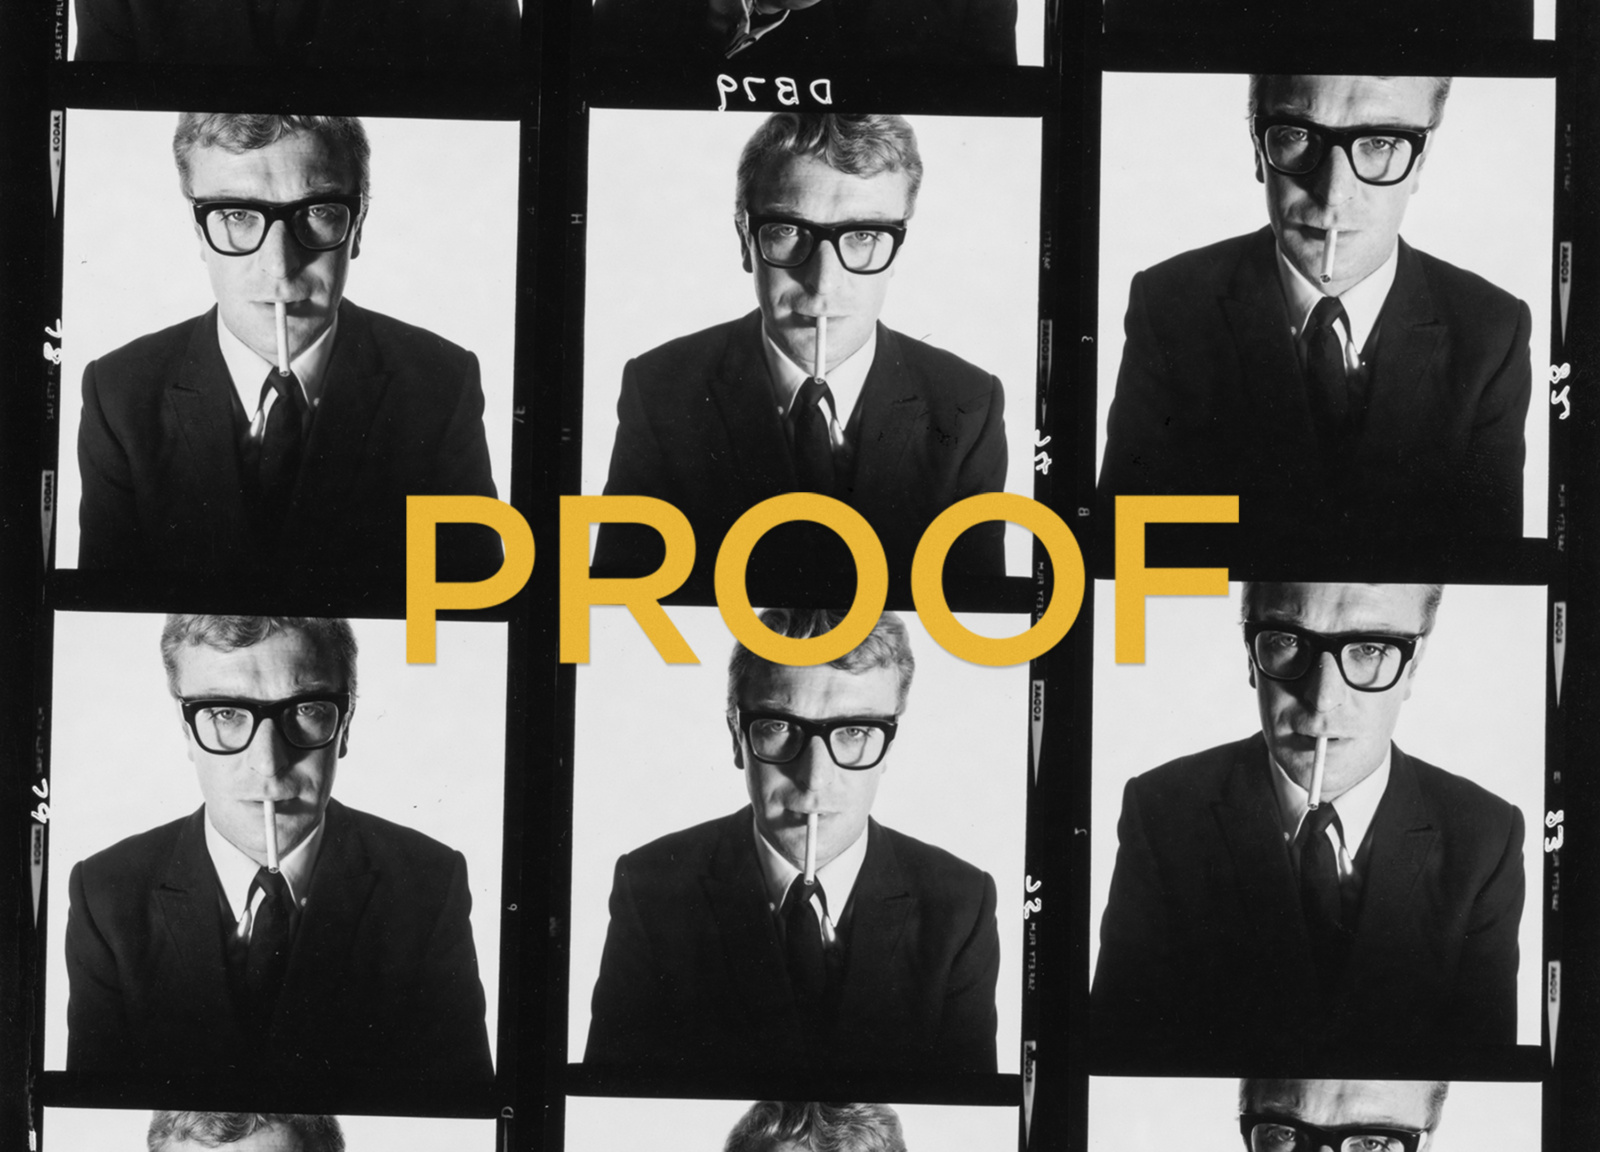 Detailed view of the PROOF book cover design, which features a Michael Caine contact sheet